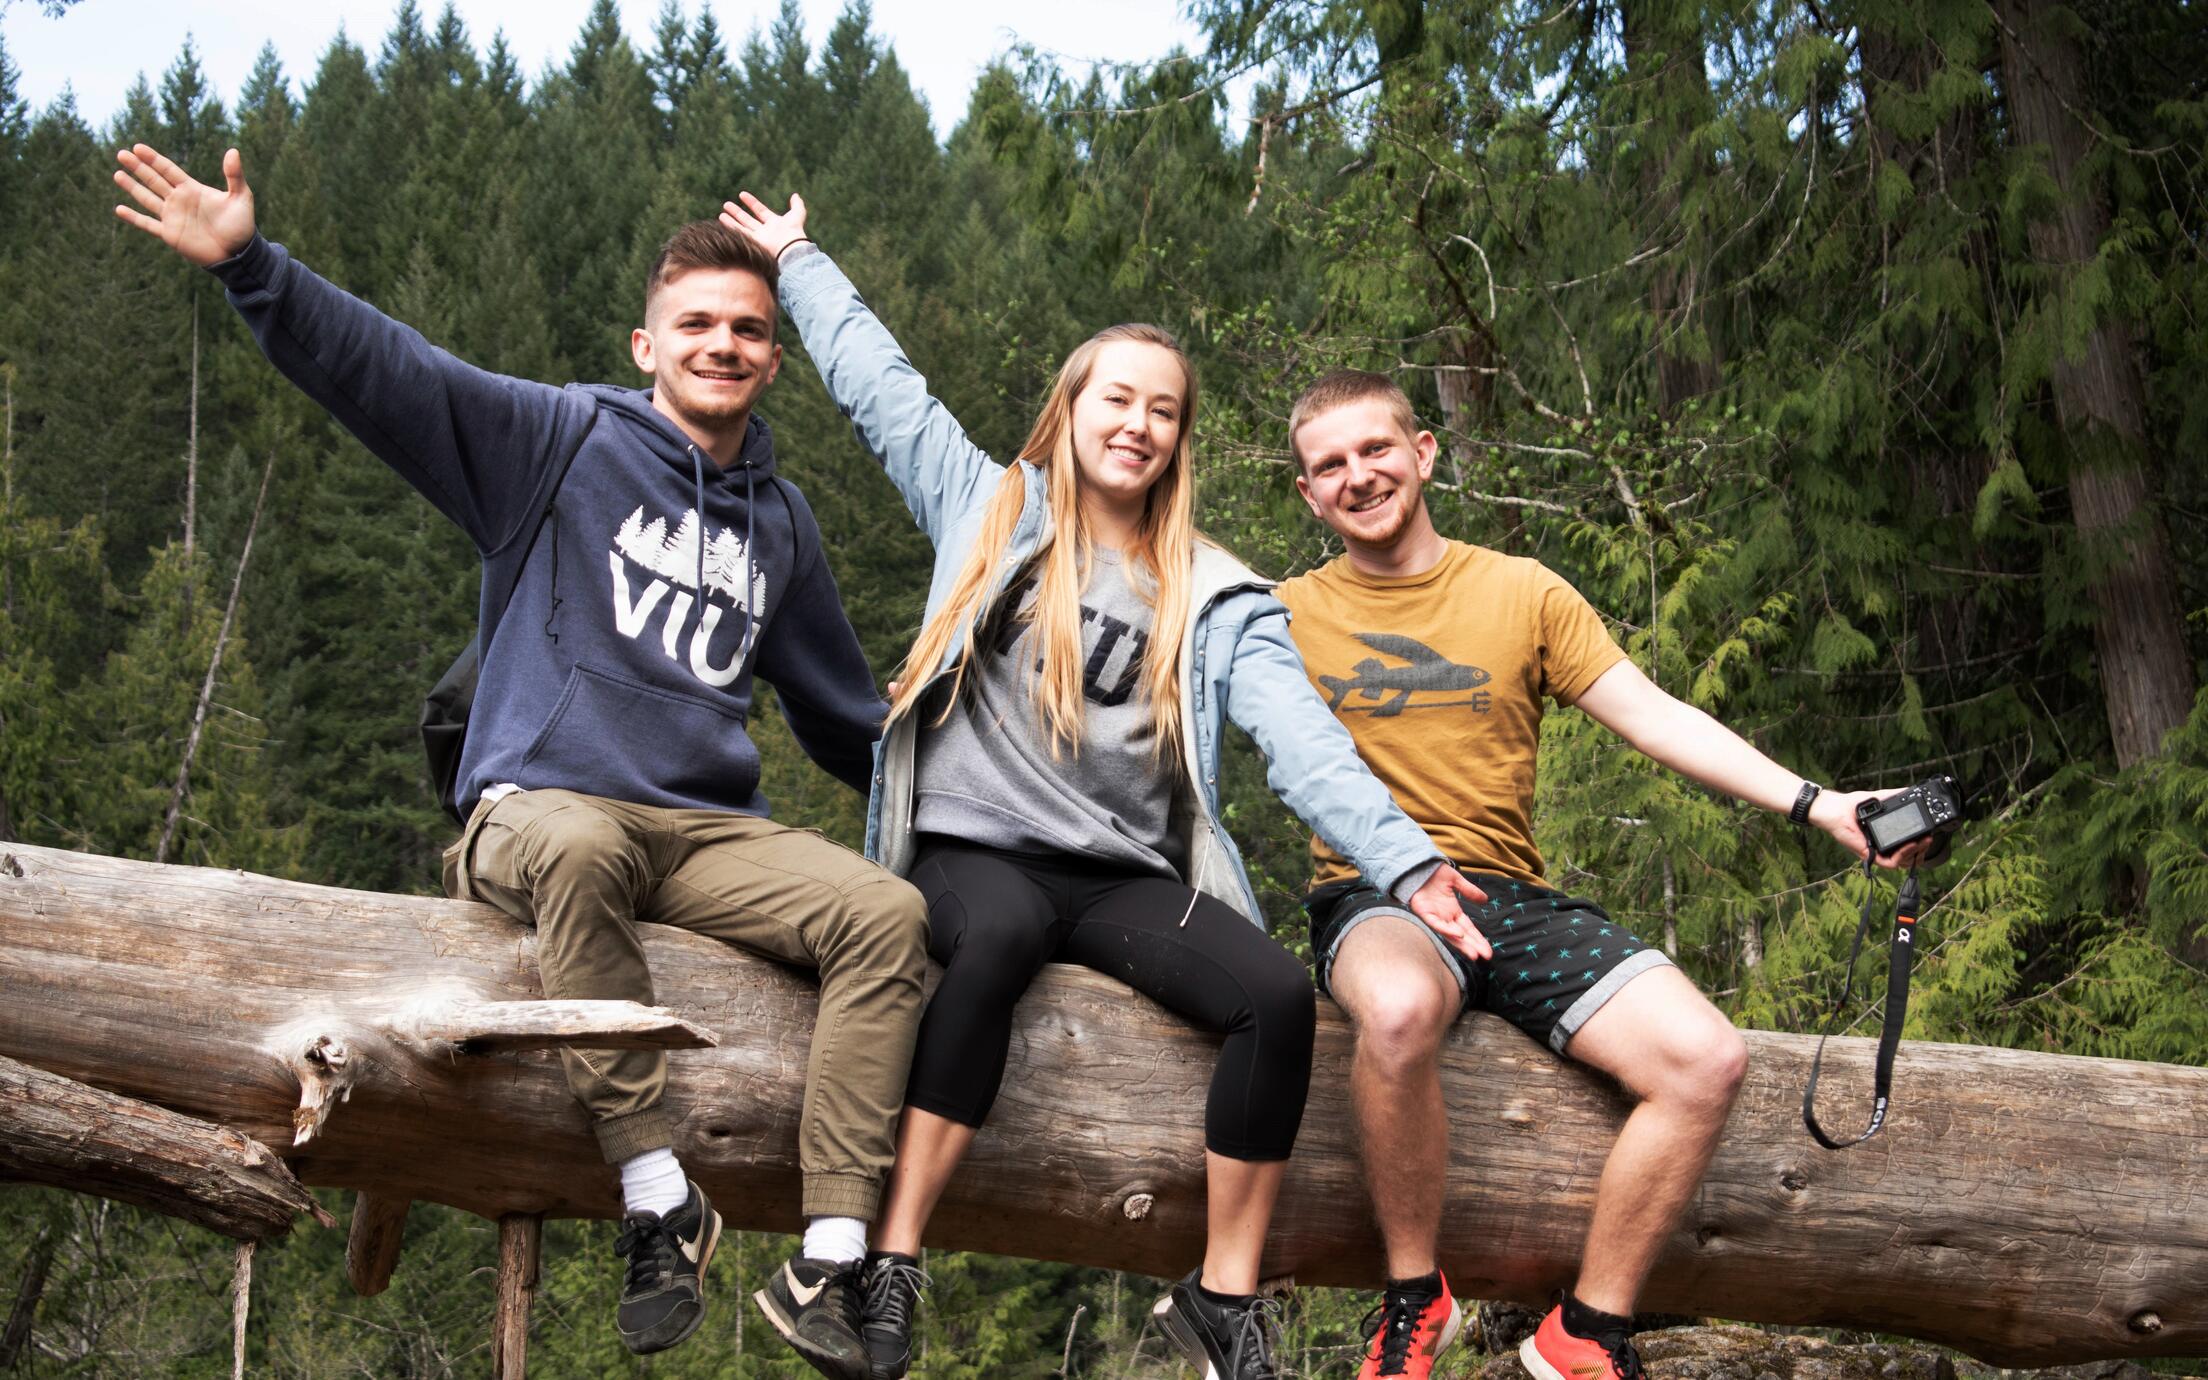 VIU - Cultural Connections - Local Hikes